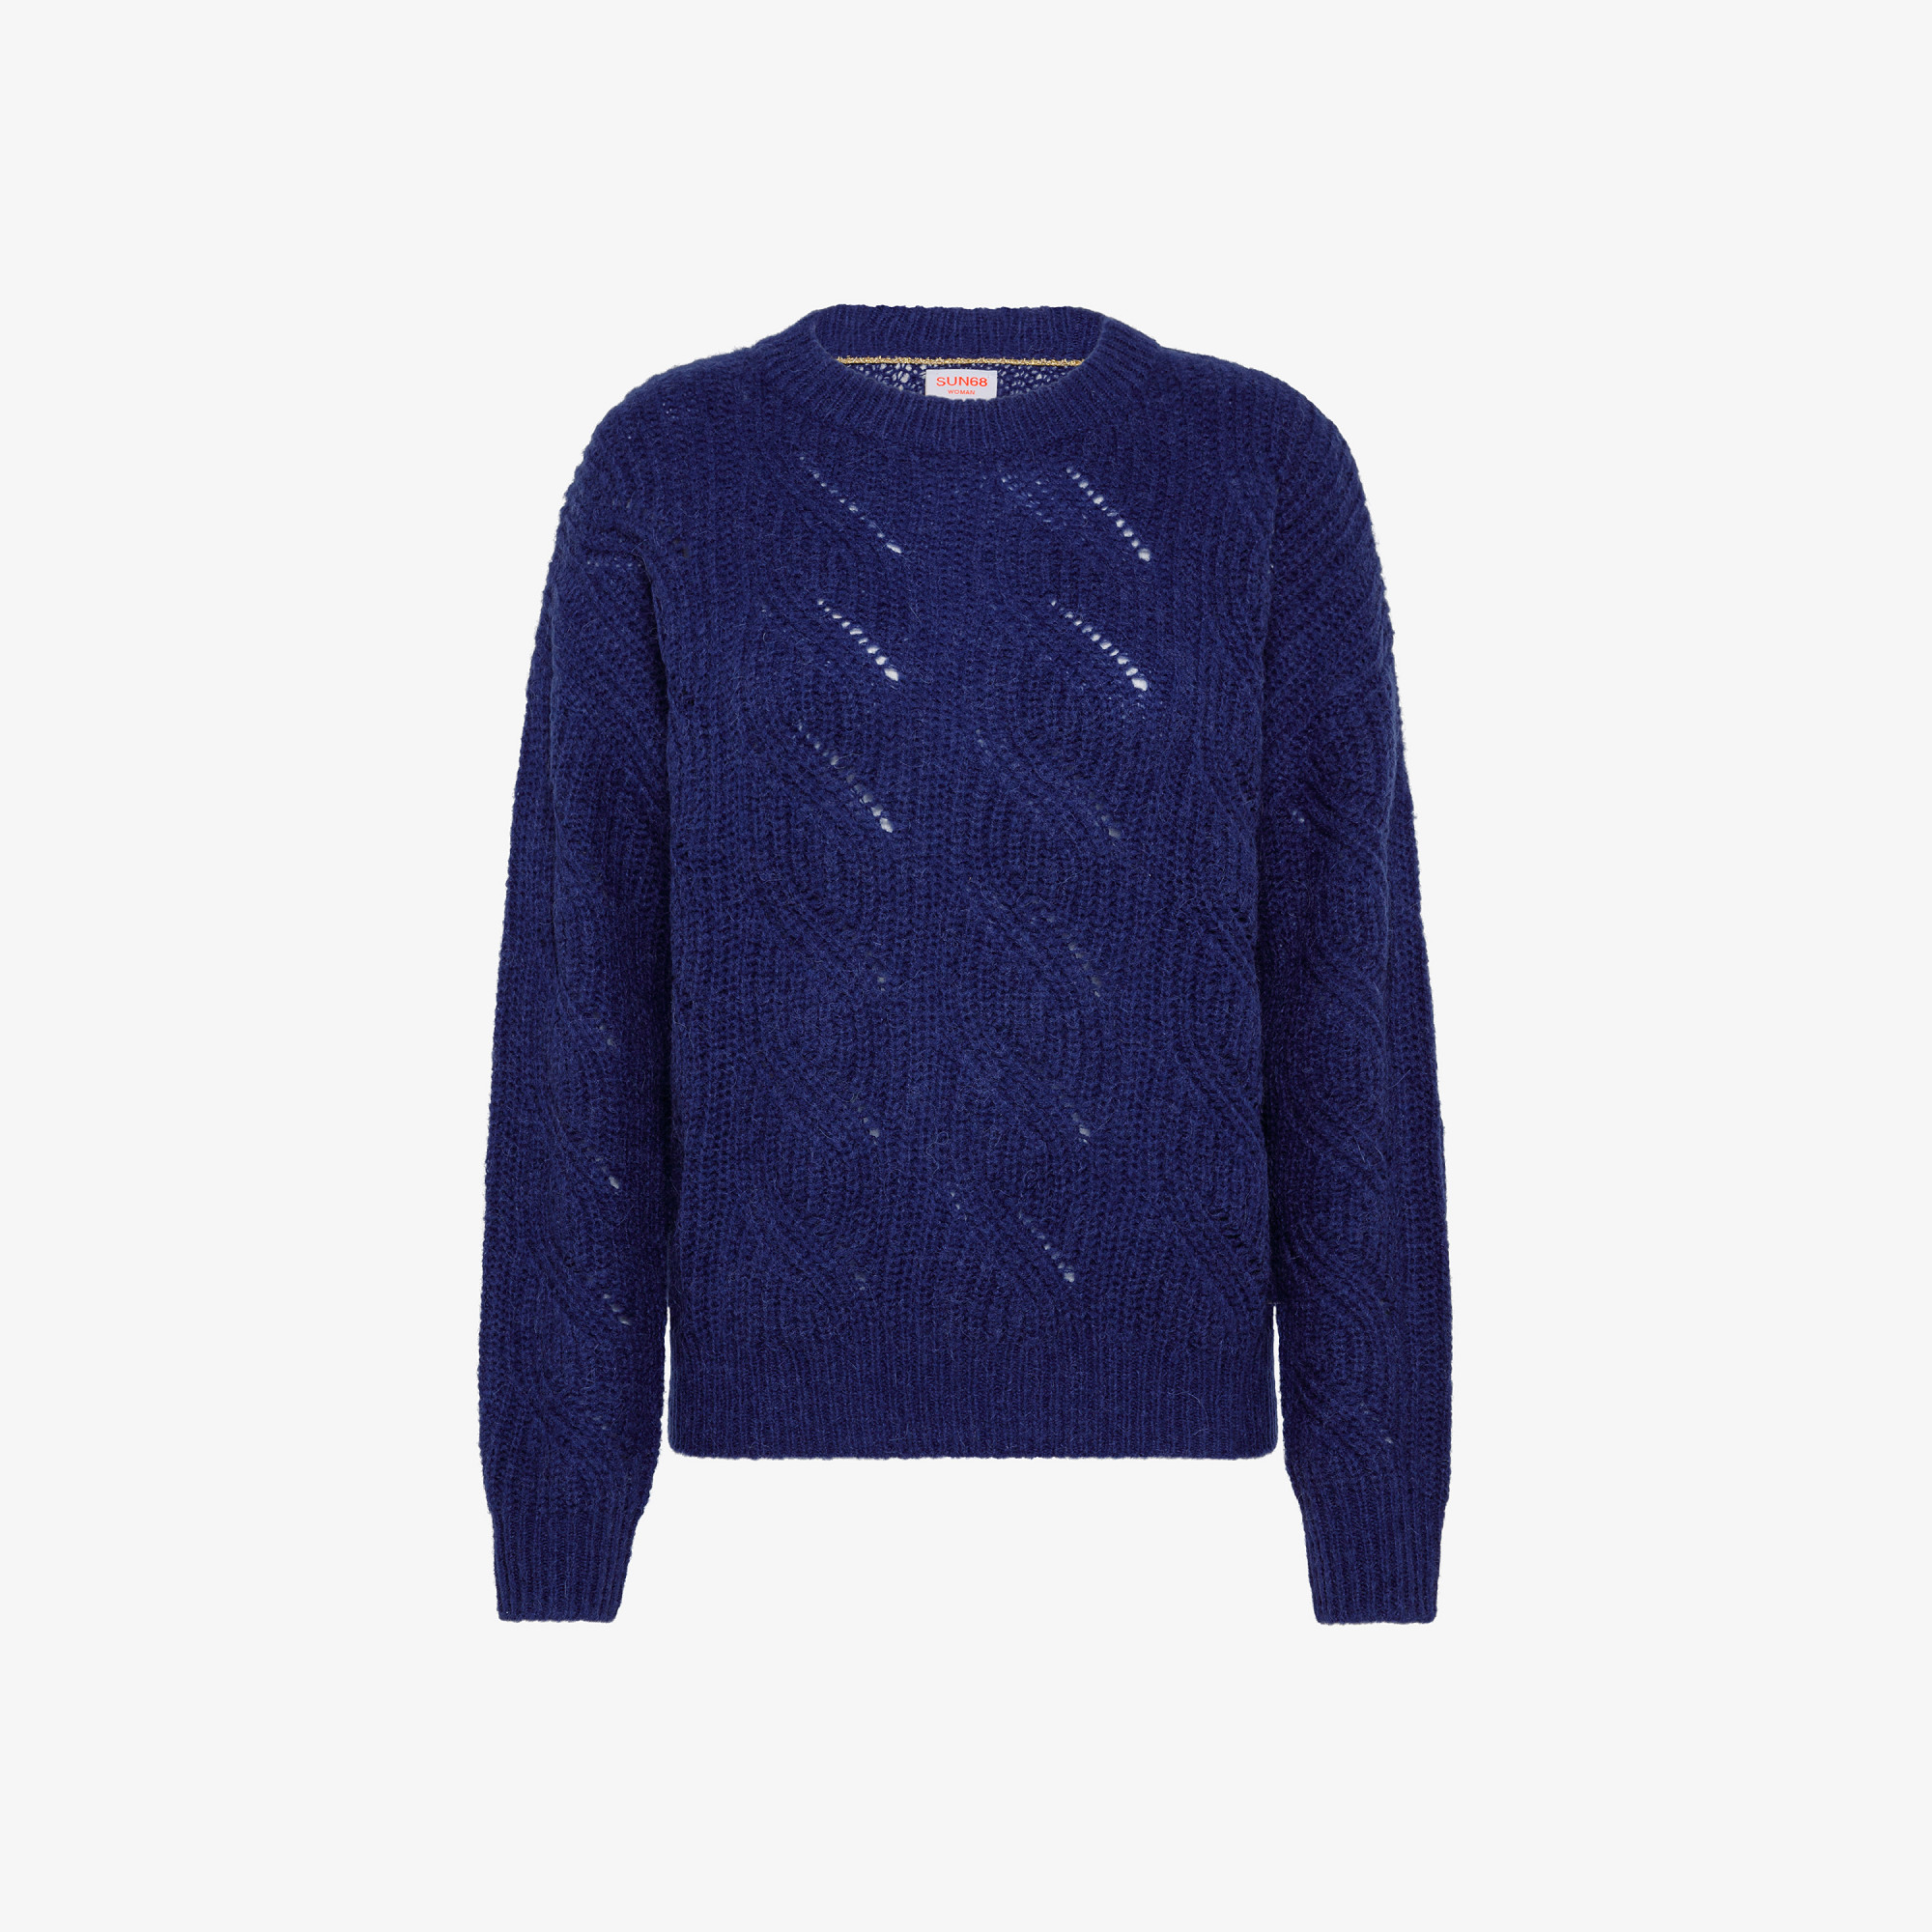 ROUND NECK HEAVY CABLE L/S NAVY BLUE